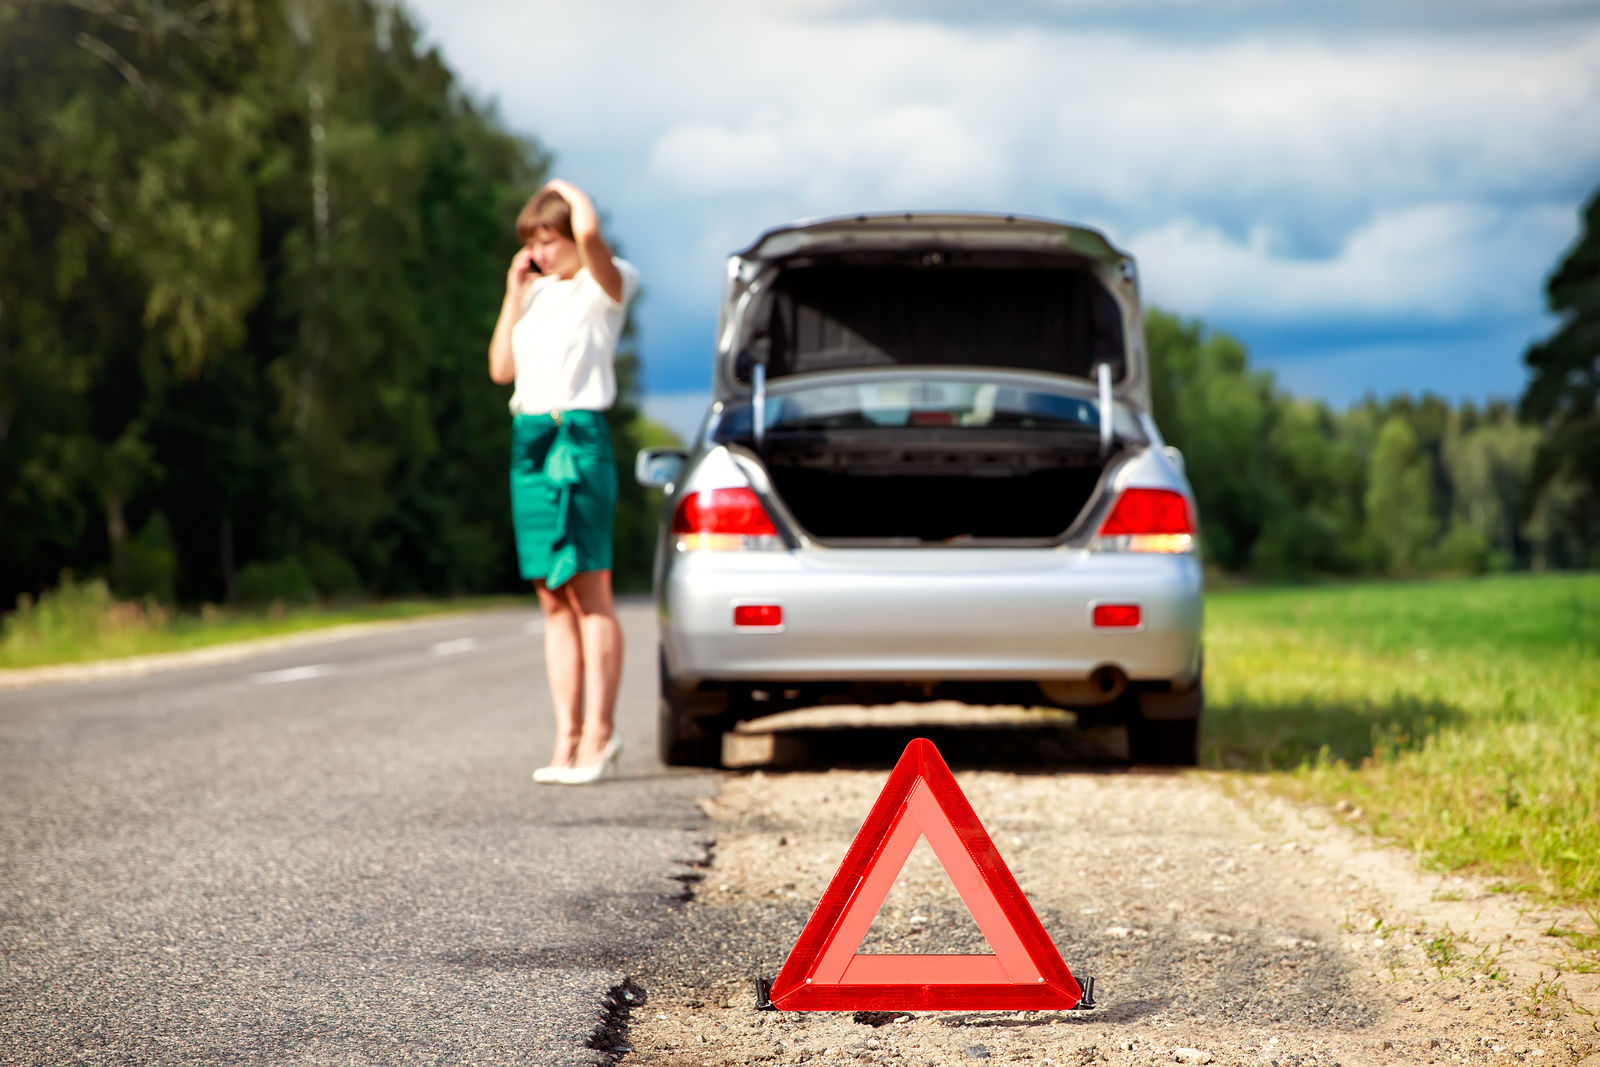 Does car insurance cover mechanical problems?